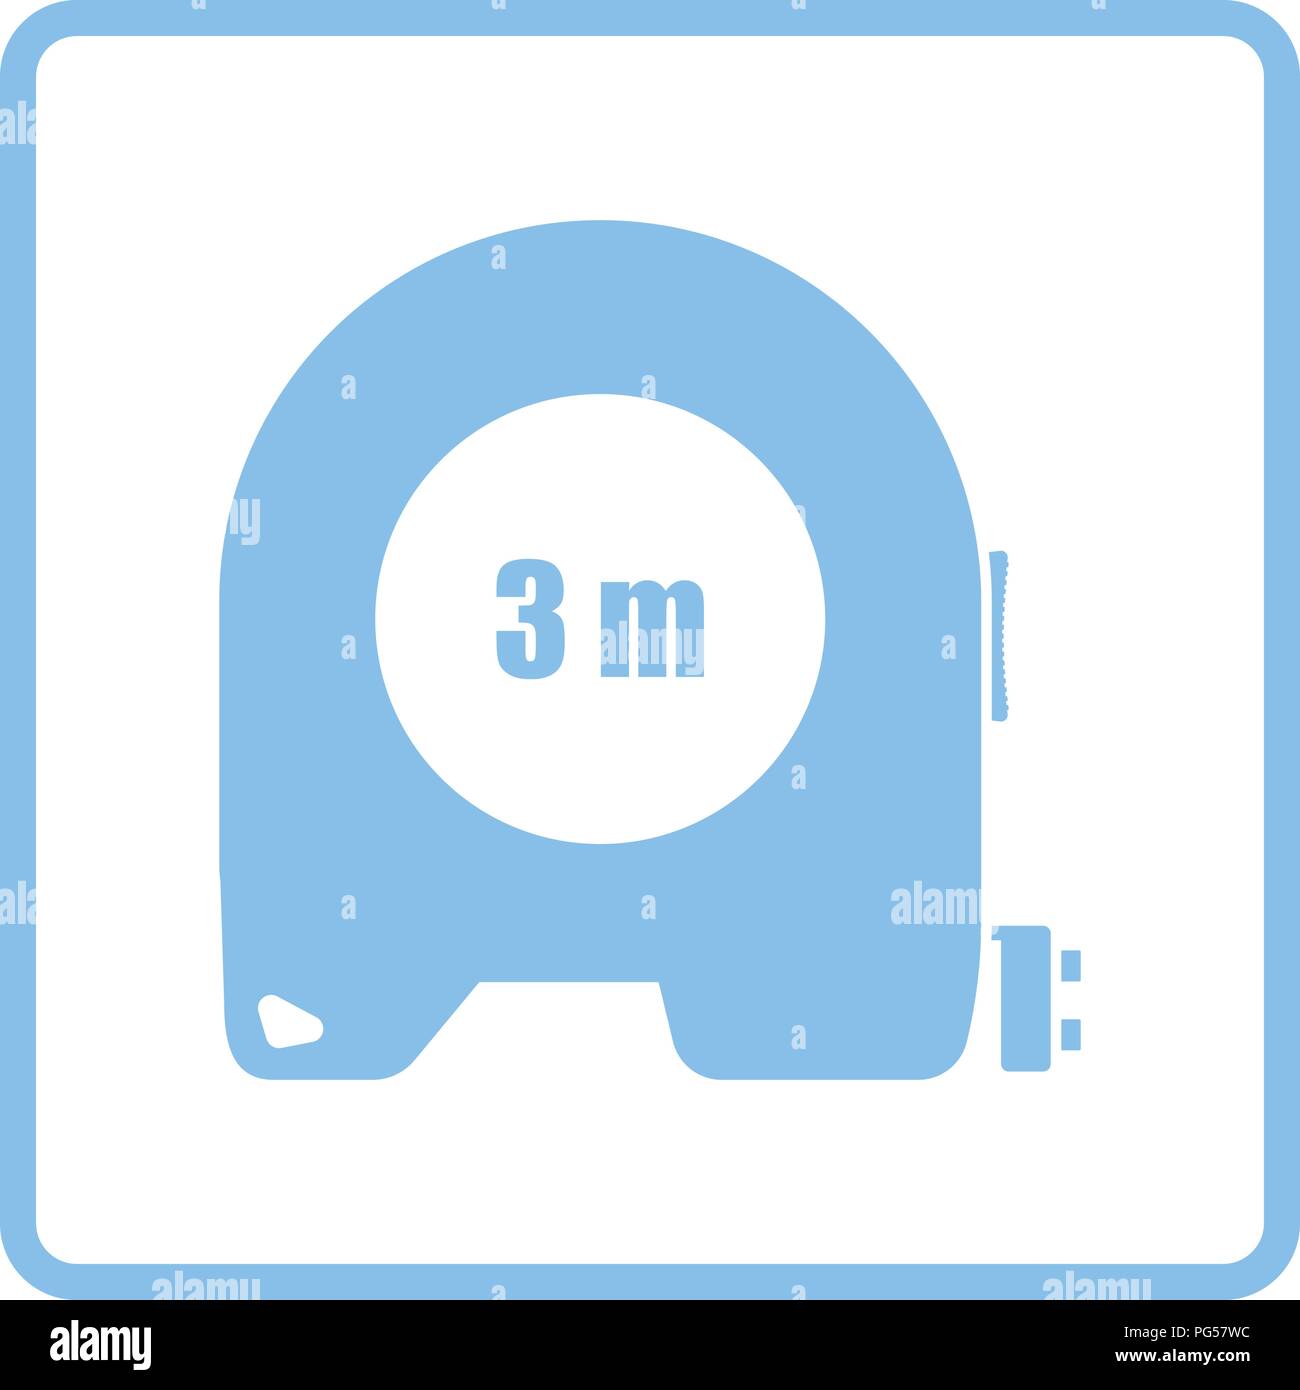 Icon of constriction tape measure. Blue frame design. Vector illustration. Stock Vector